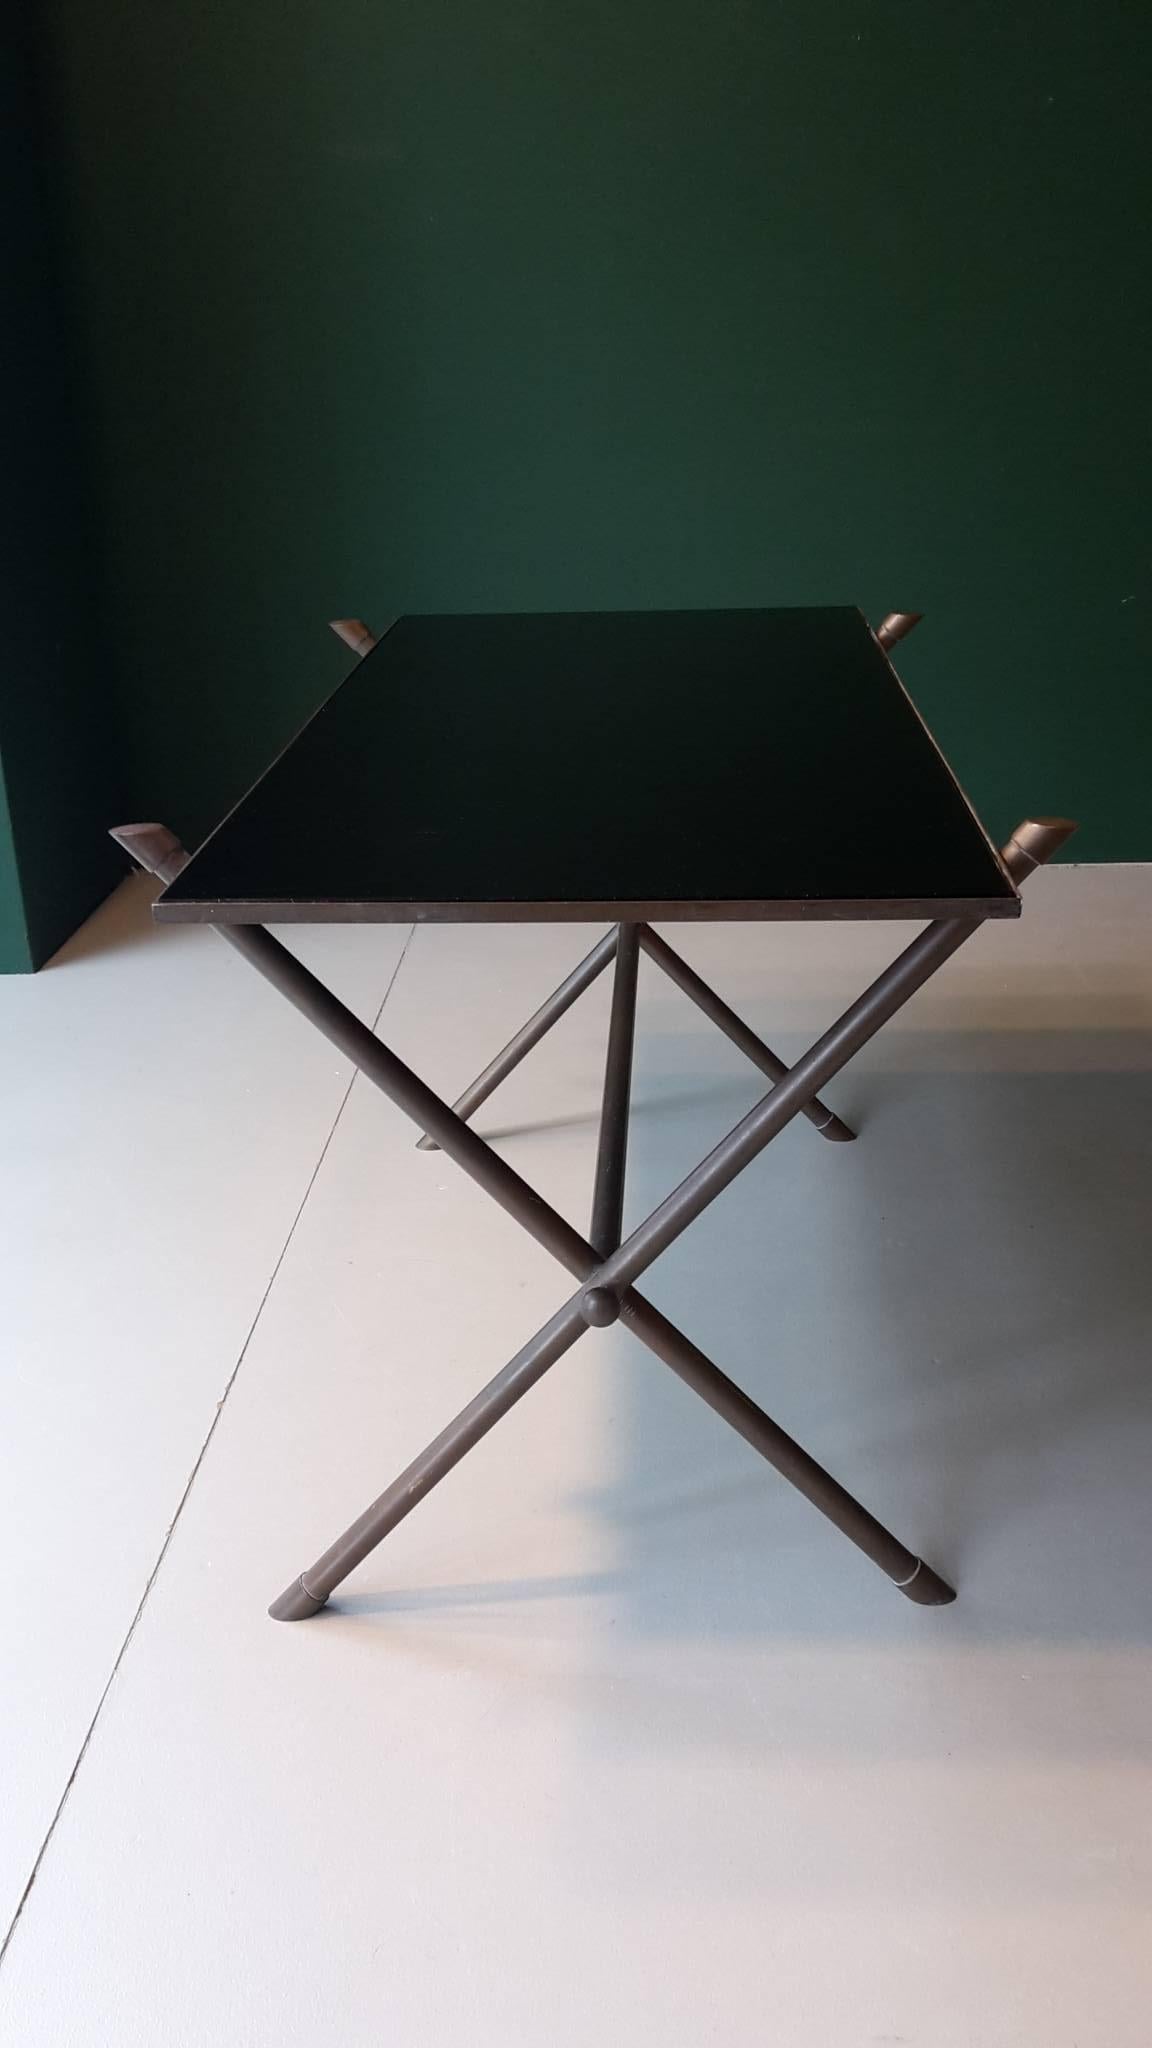 20th century French coffee table from the 1960s made of brass and black glass.